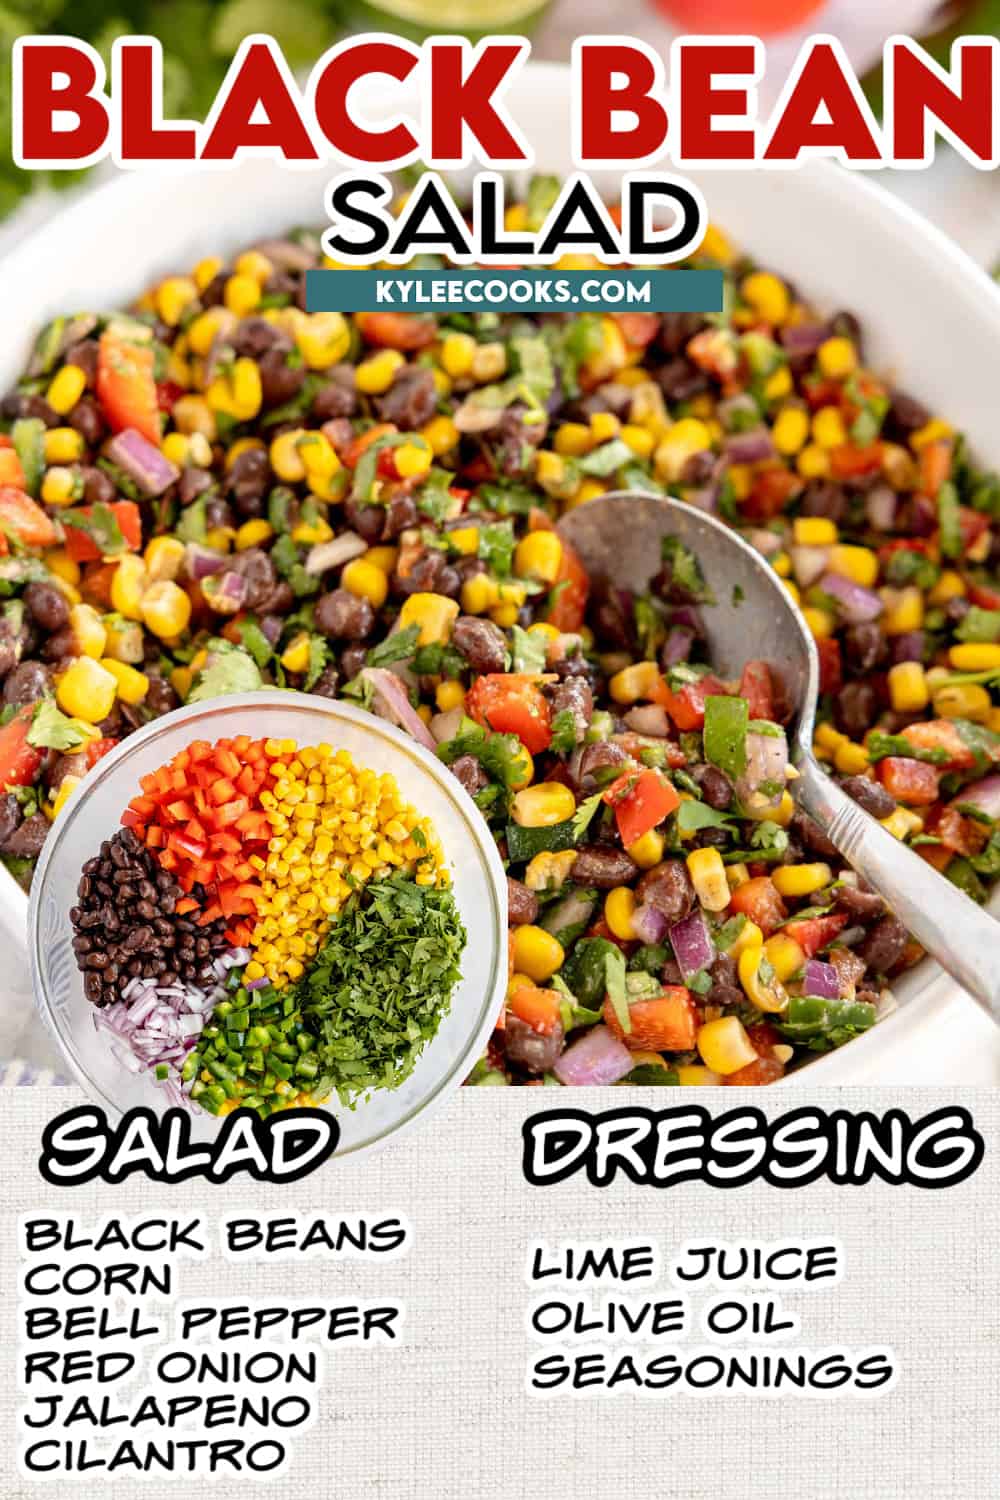 black bean salad in a bowl with a spoon, with text and ingredients overlaid.